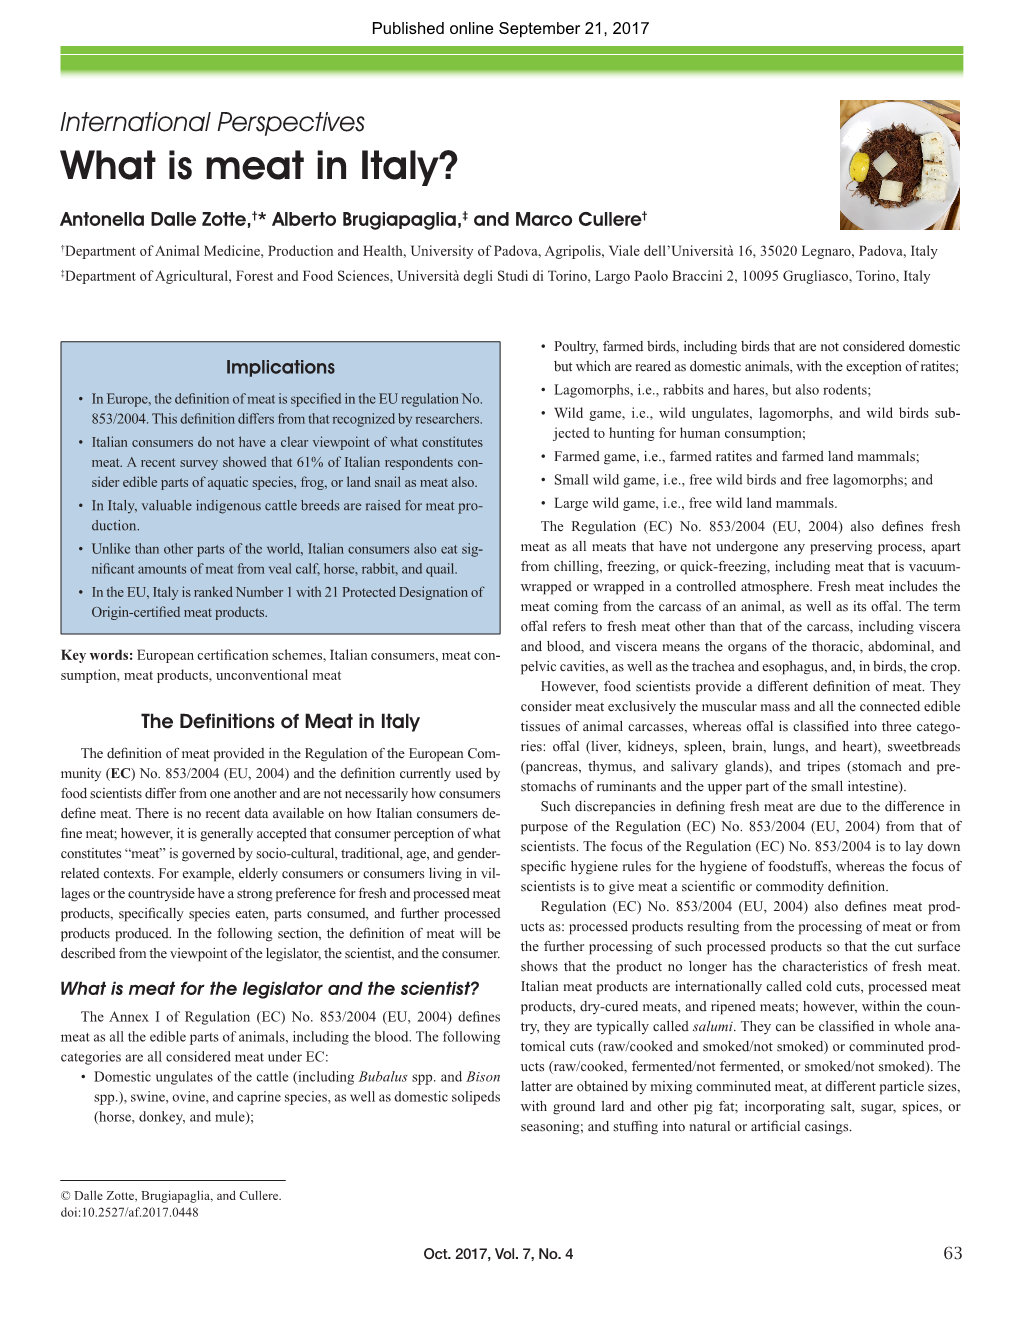 What Is Meat in Italy?